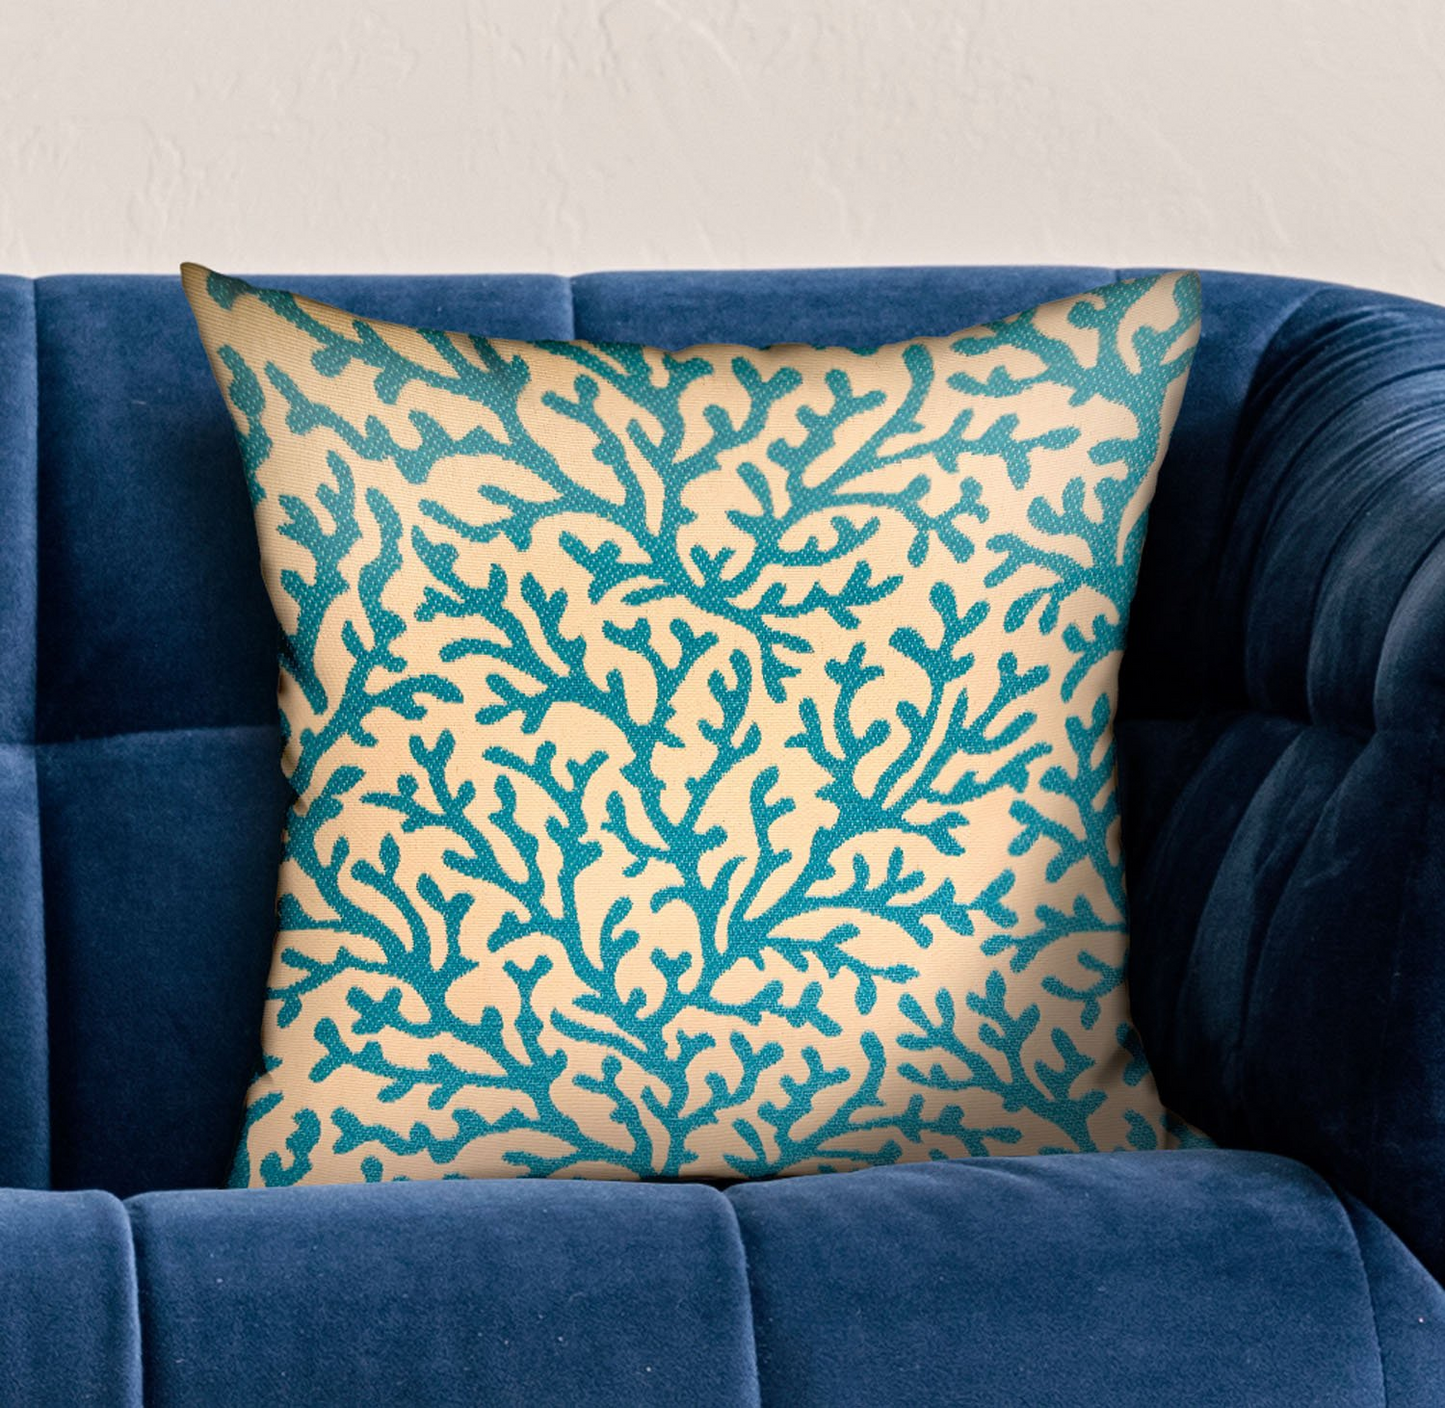 Marlin Vines Floral Throw Pillow